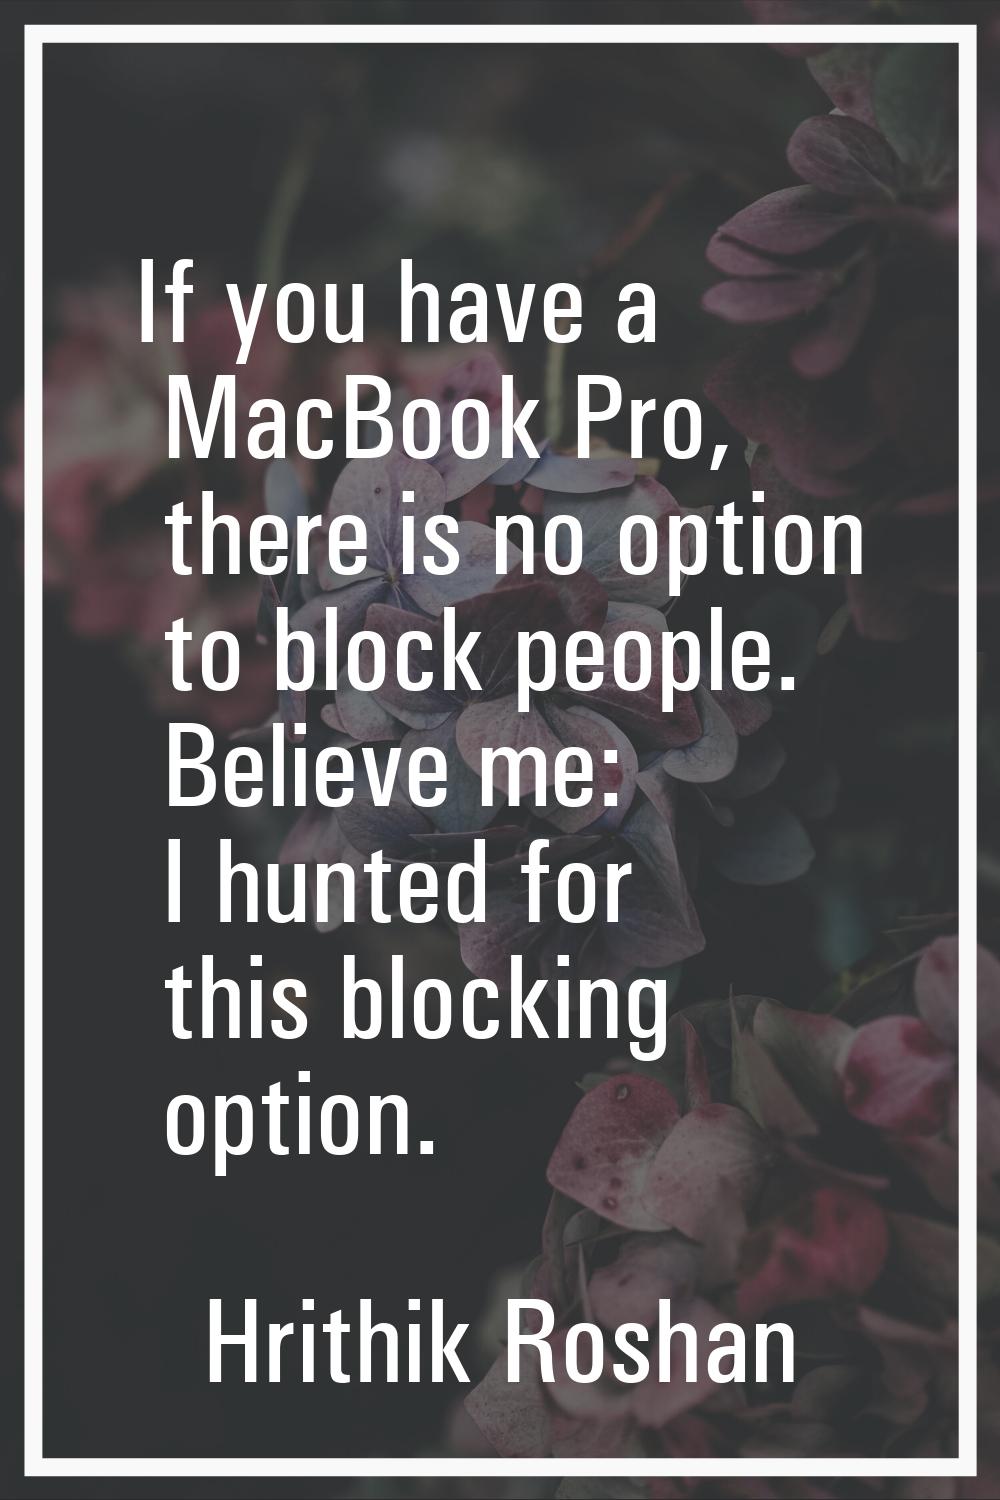 If you have a MacBook Pro, there is no option to block people. Believe me: I hunted for this blocki